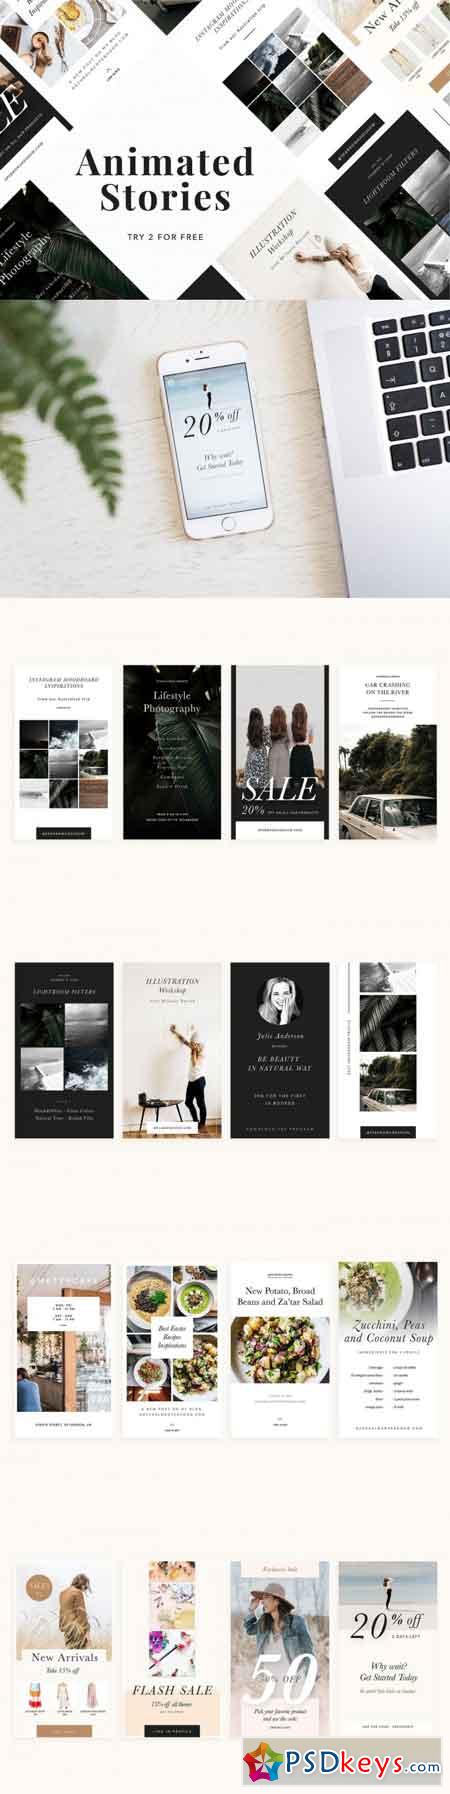 ANIMATED Stories Templates 3484270